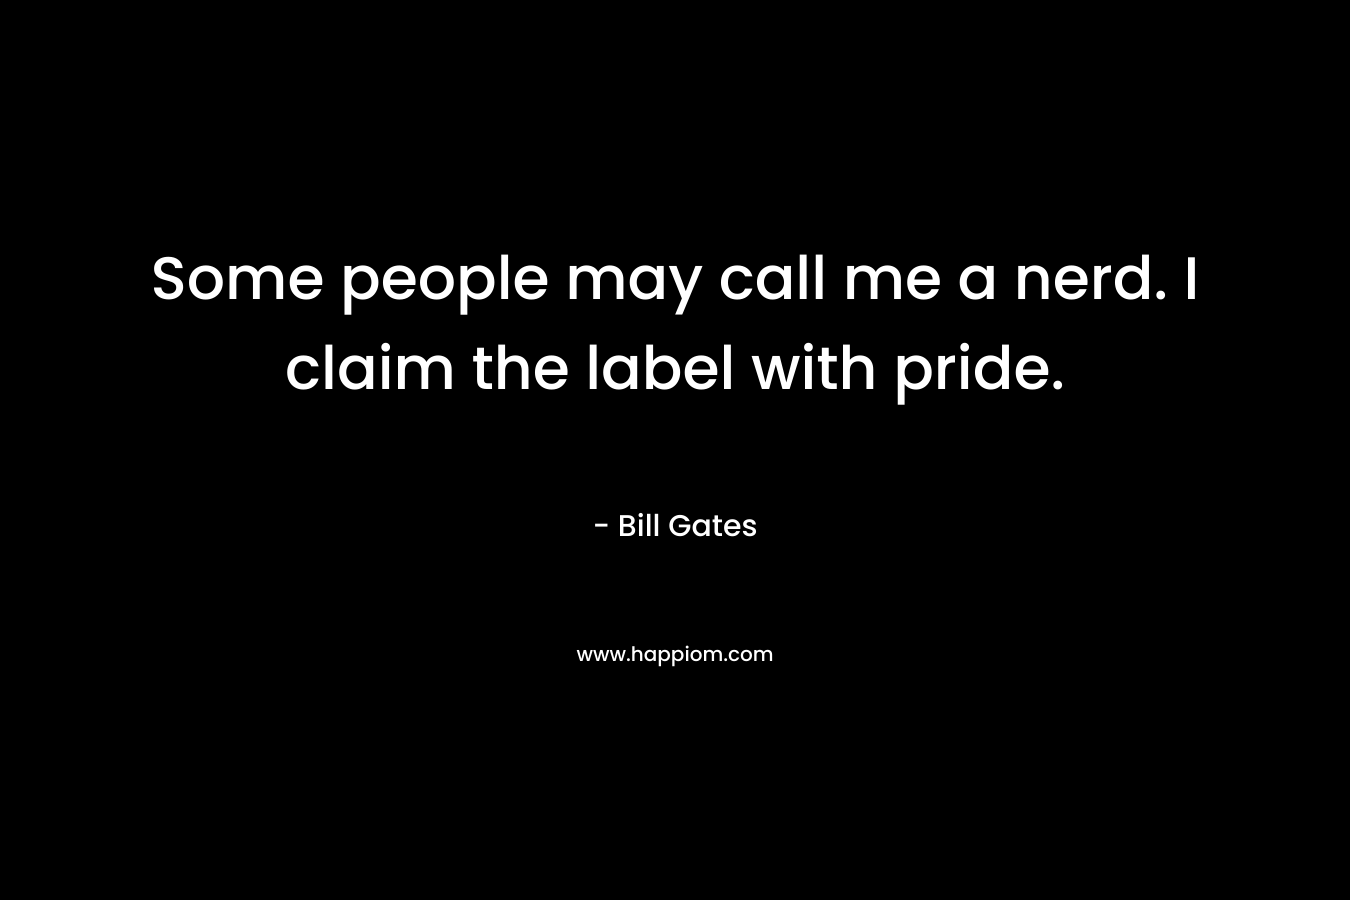 Some people may call me a nerd. I claim the label with pride. – Bill Gates